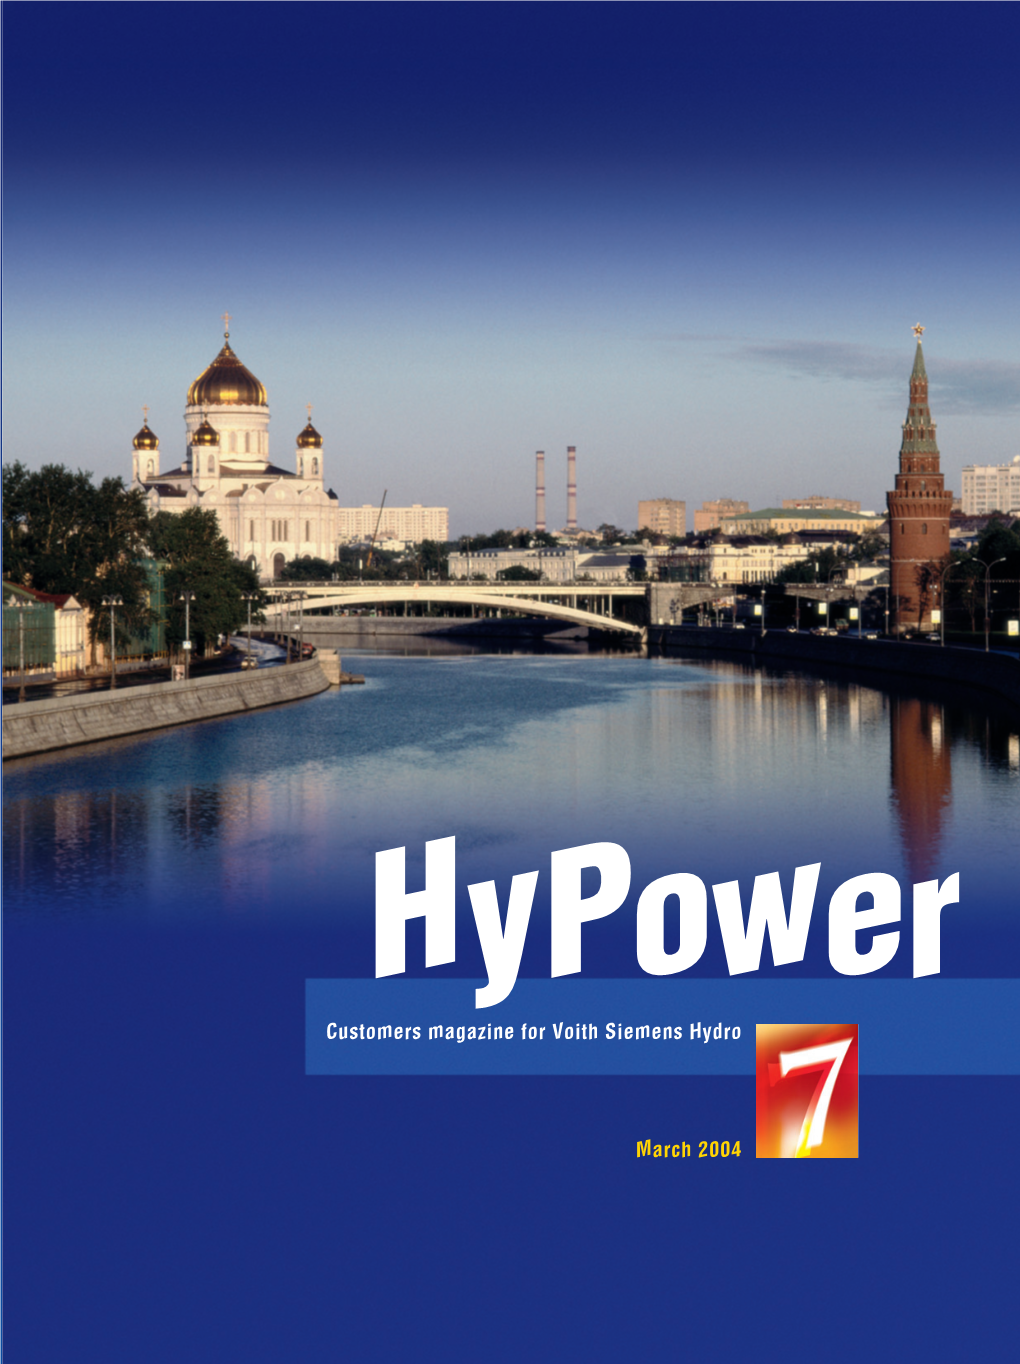 Customers Magazine for Voith Siemens Hydro March 2004